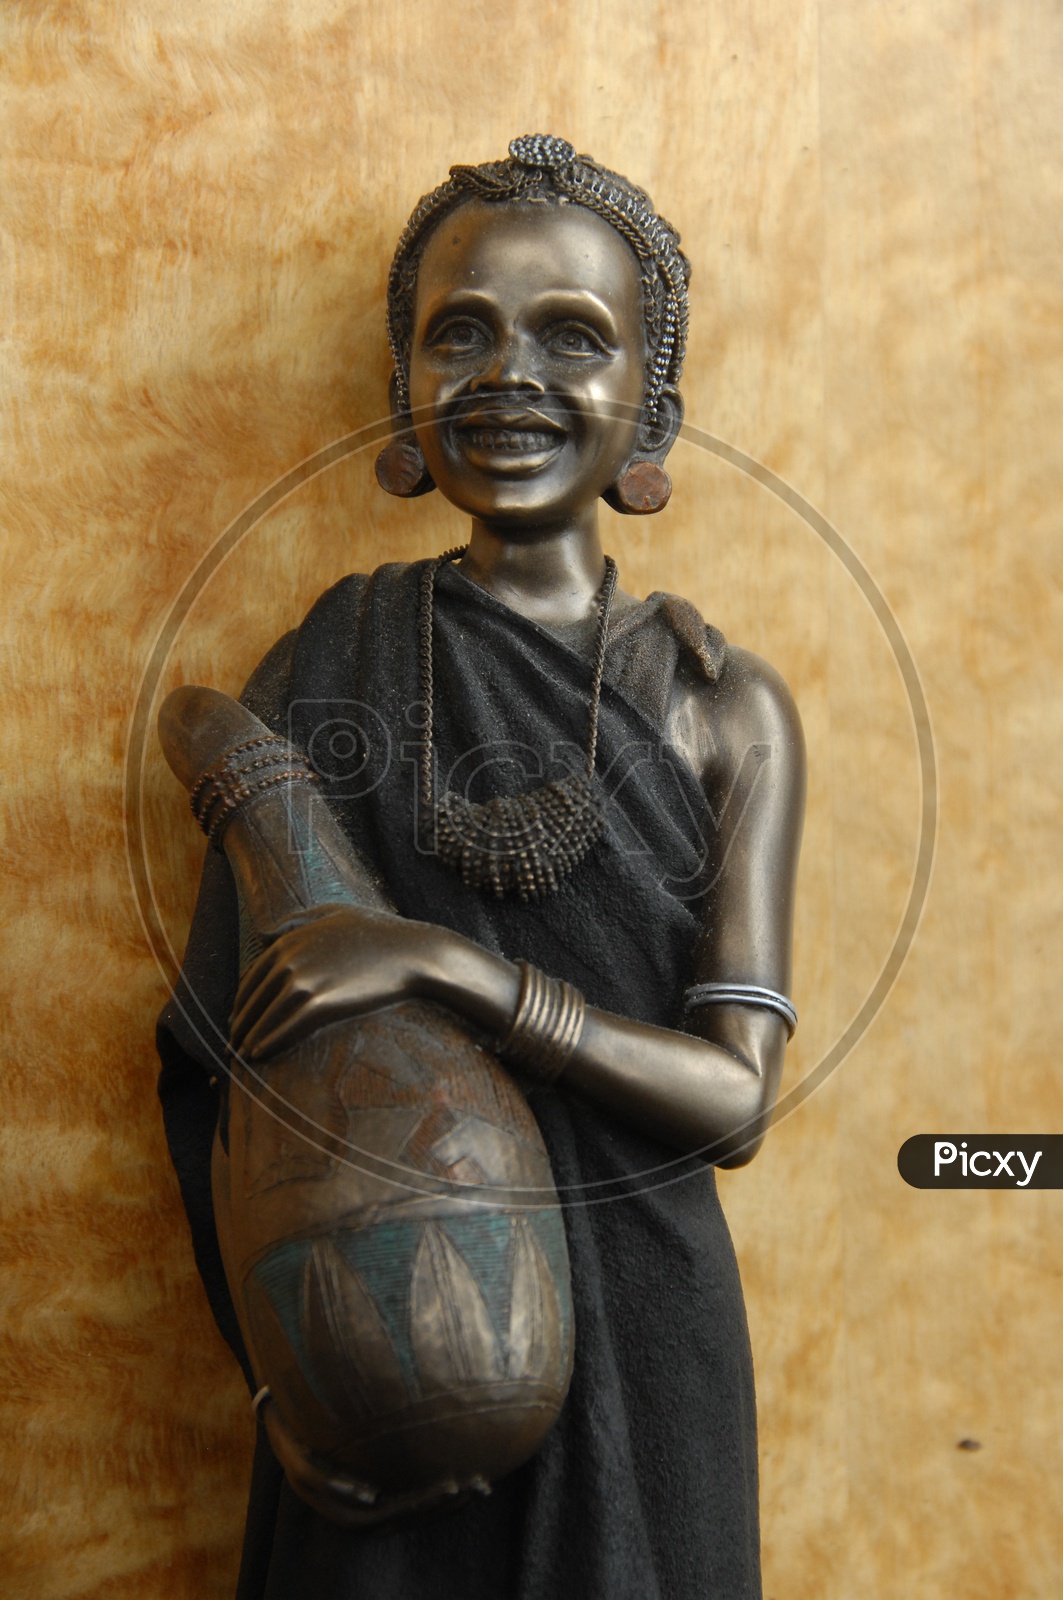 A smiling woman statue made out of metal